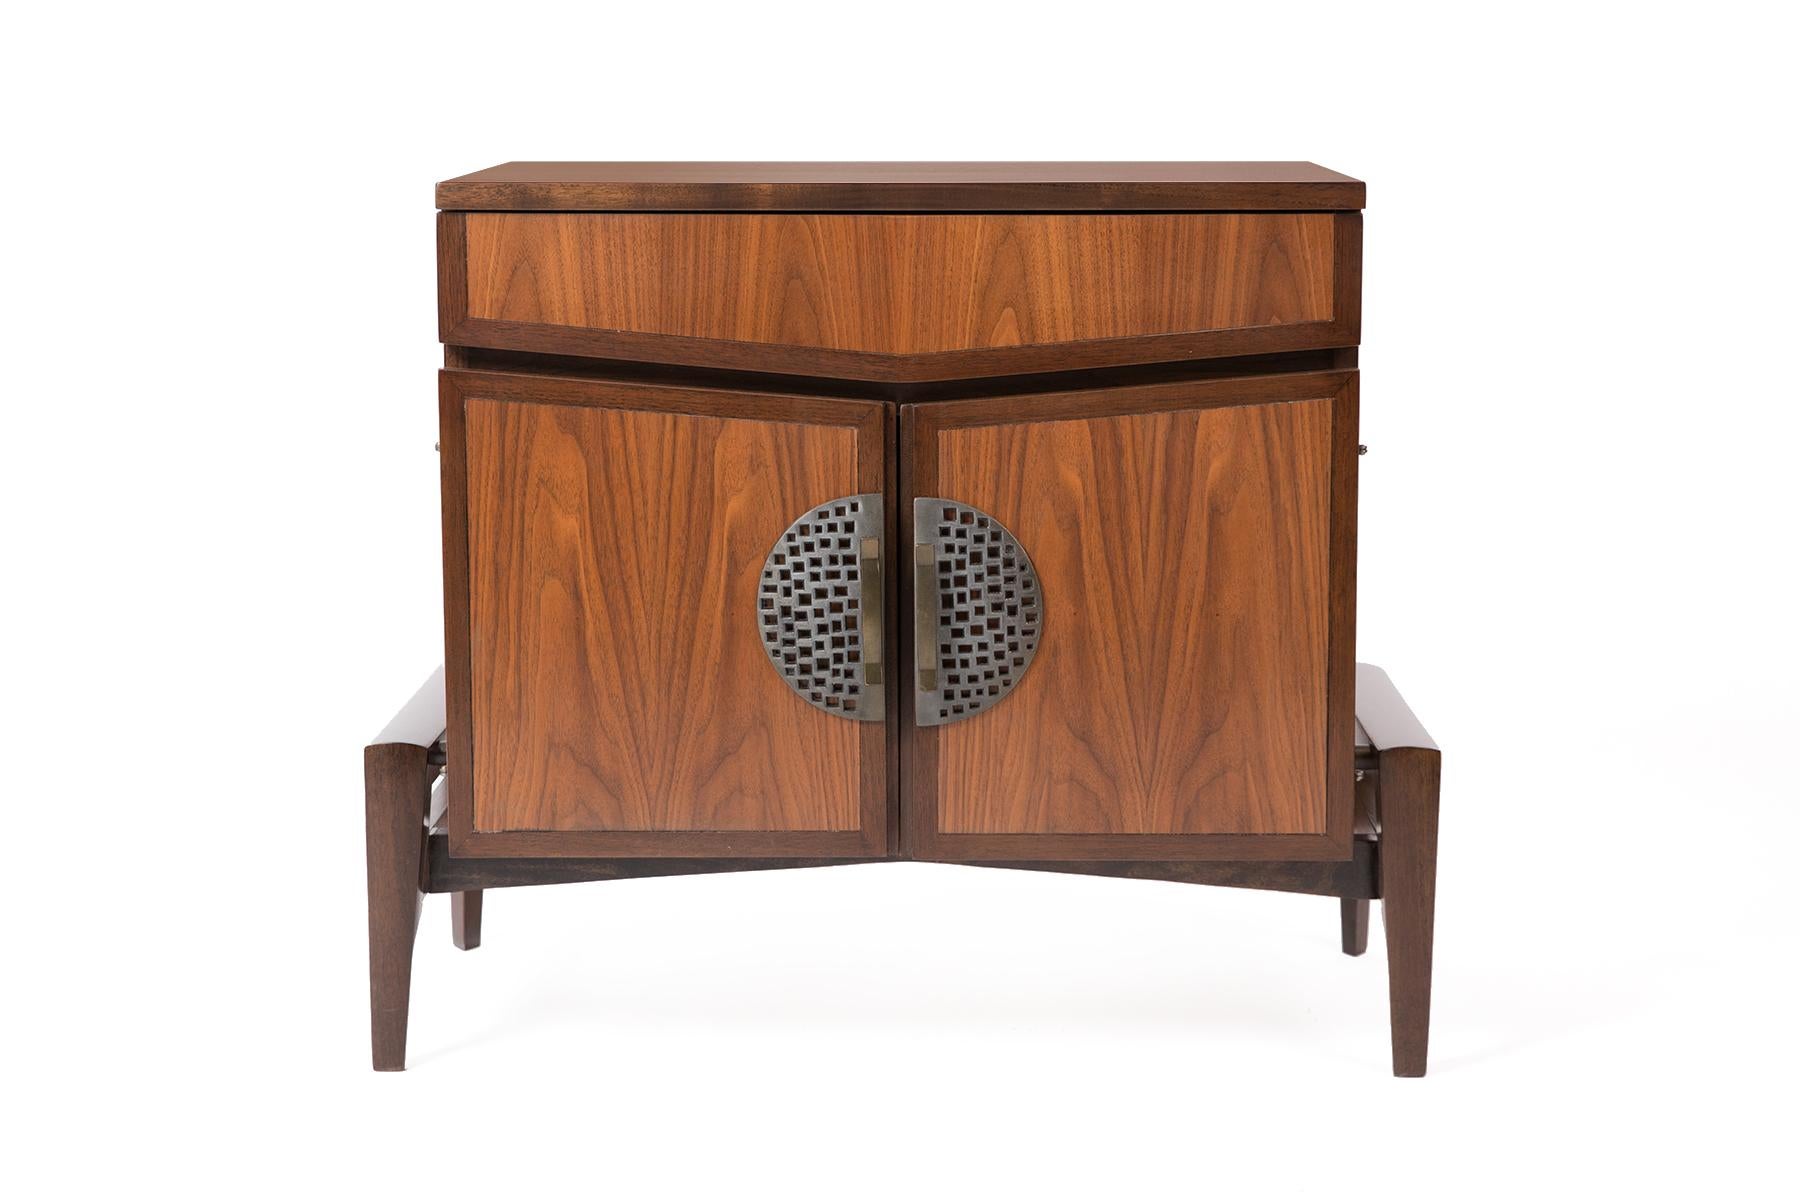 Pair of newly finished walnut nightstands by Helen Hobey for Baker. These examples feature formed bronze pulls, sculptural forms and plenty of interior storage. Price listed is for the pair.